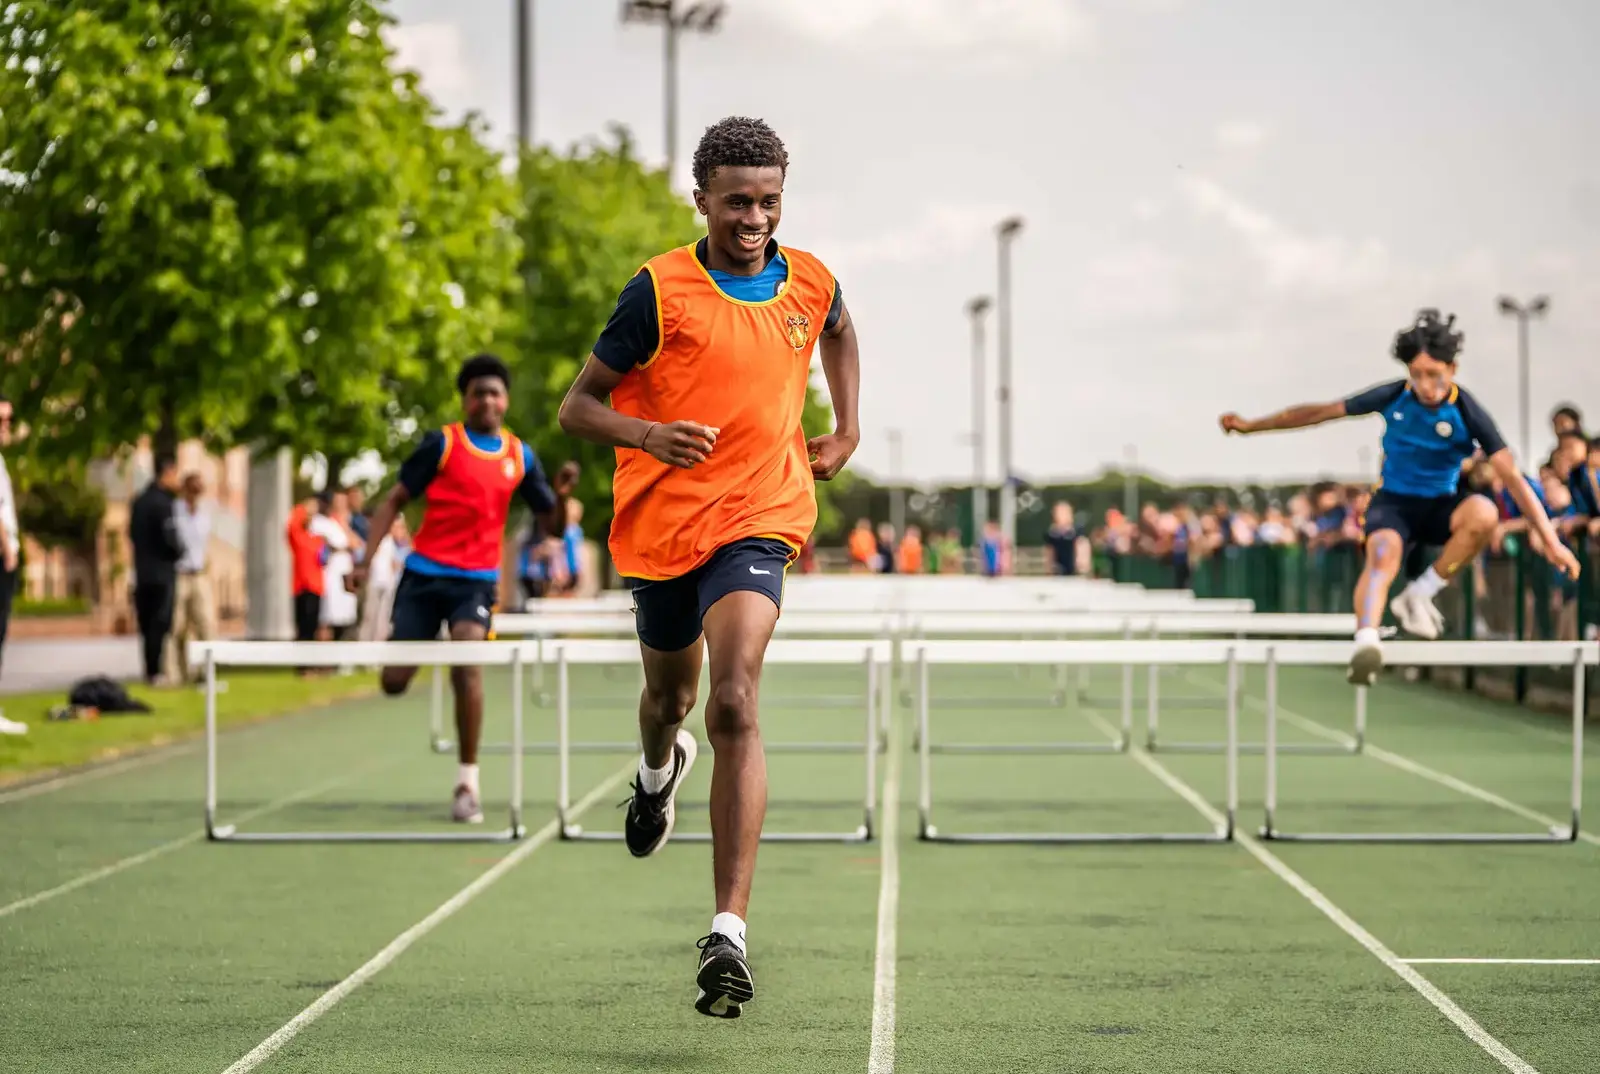 King's Magna pupil competing in a running event at Queen Ethelburga's Collegiate